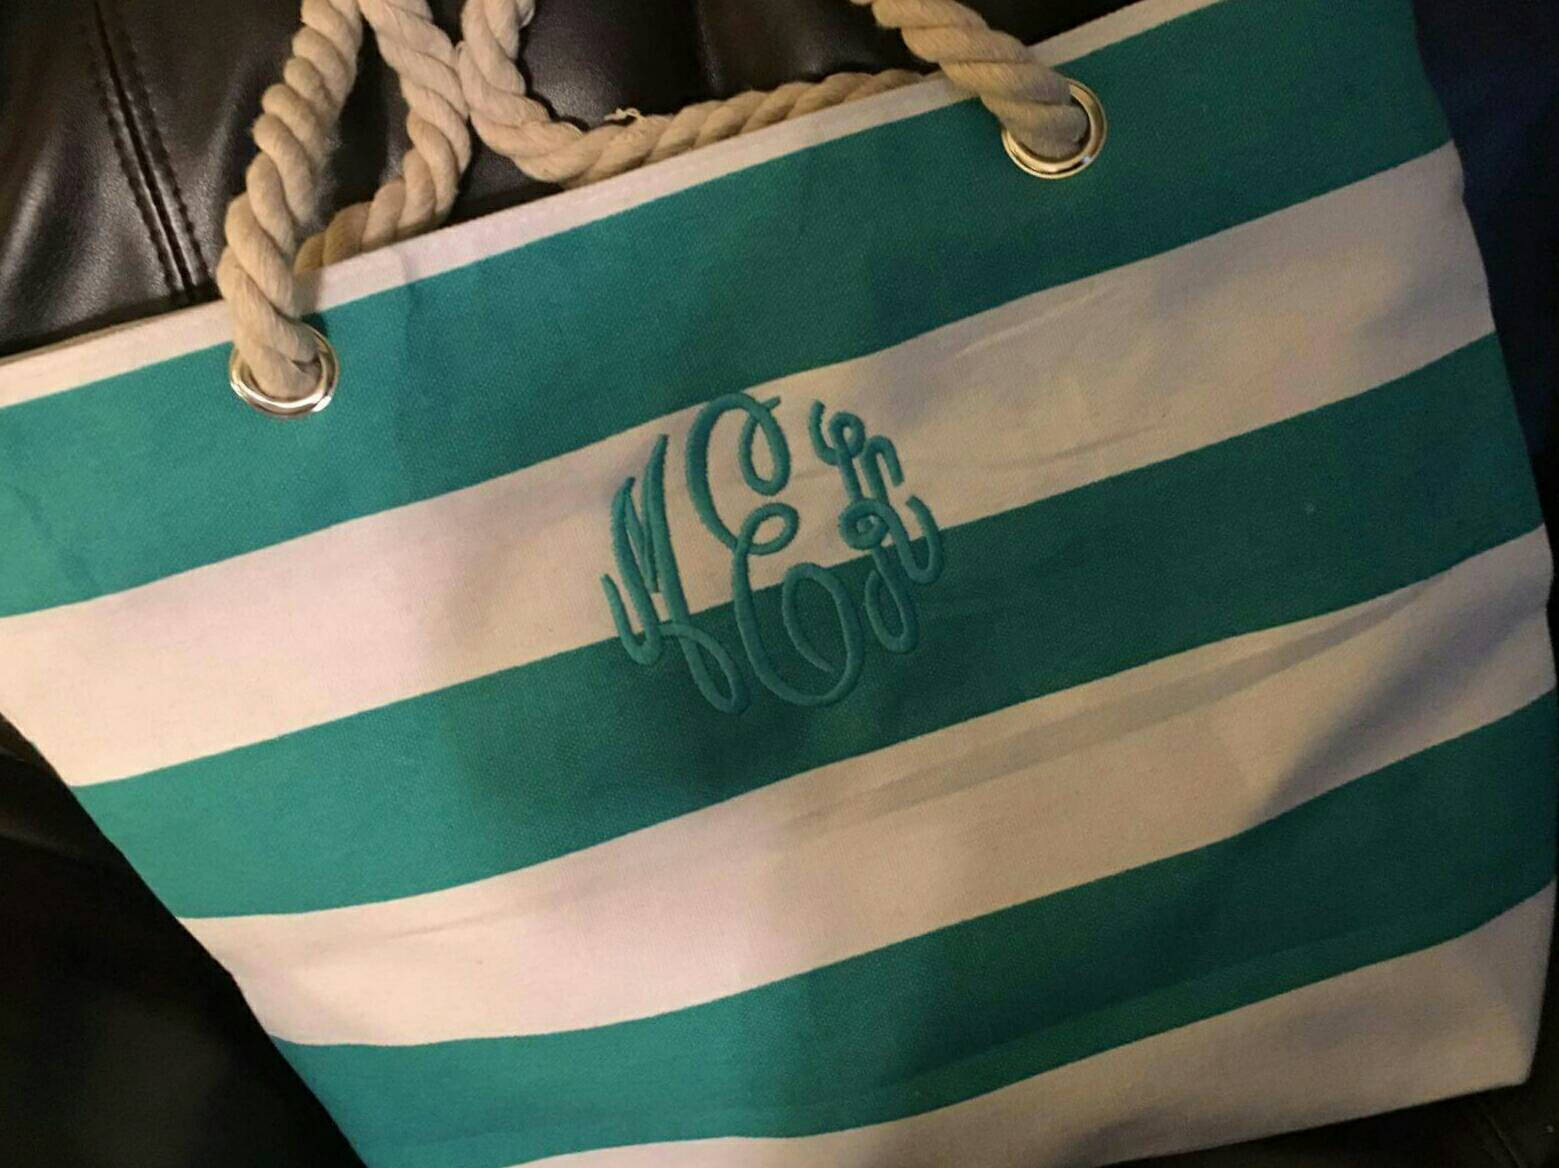 Personalized Summer Beach Bag